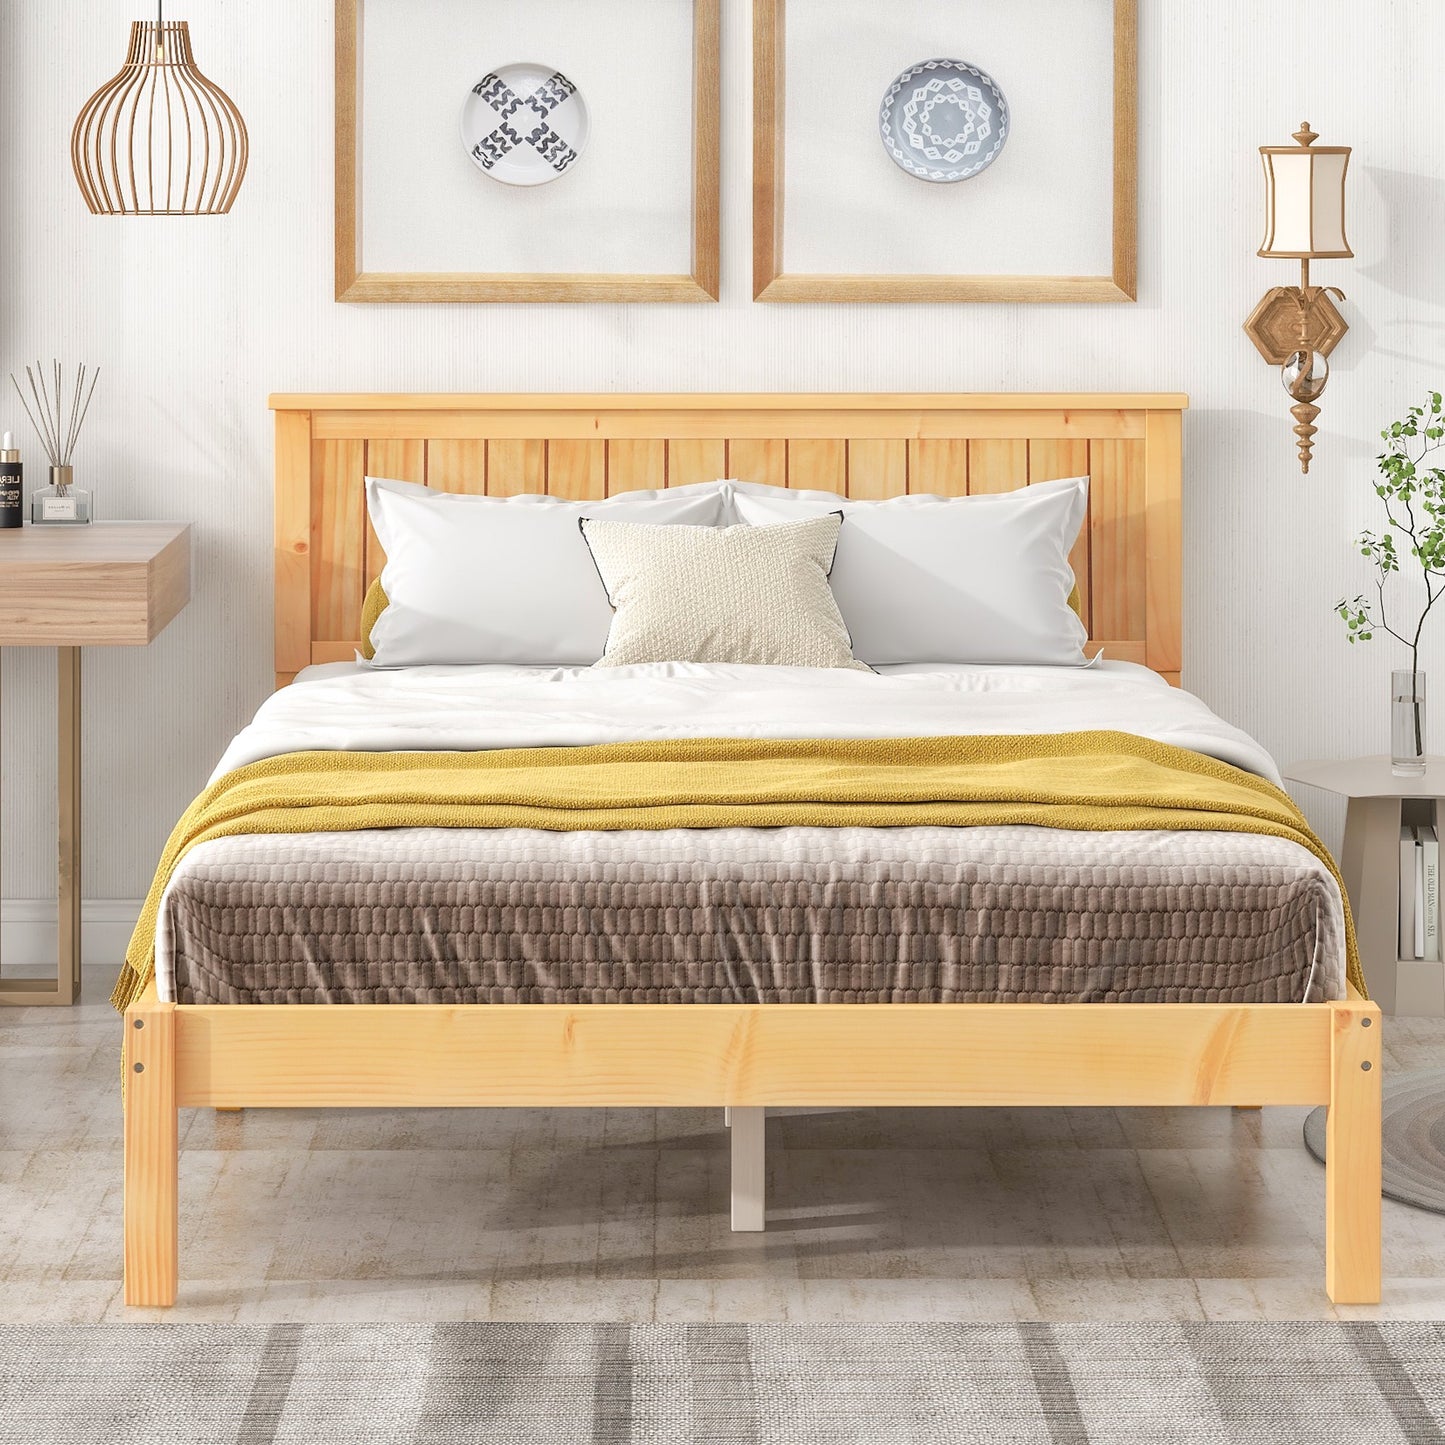 CASEMIOL Full Size Wood Bed Frame with Headboard,No Box Spring Needed Platform Bed,Heavy Duty Wood Slat Support,Under-Bed Storage,Country Style,Natural